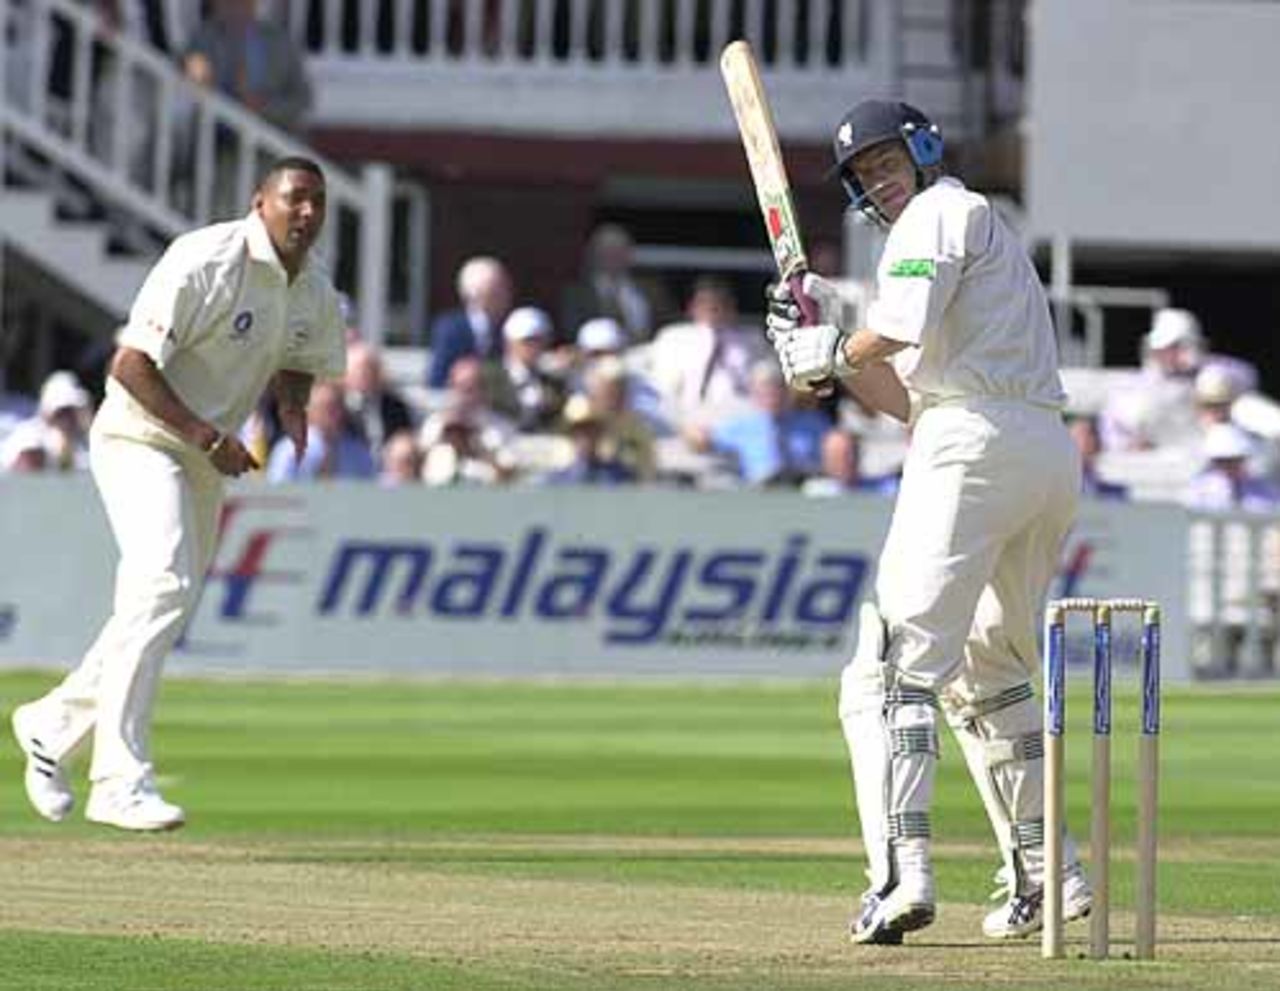 Peter Bowler turns a deFreitas delivery to the leg side for a single, C&G Trophy final, Lord's, Sat 1 Sep 2001